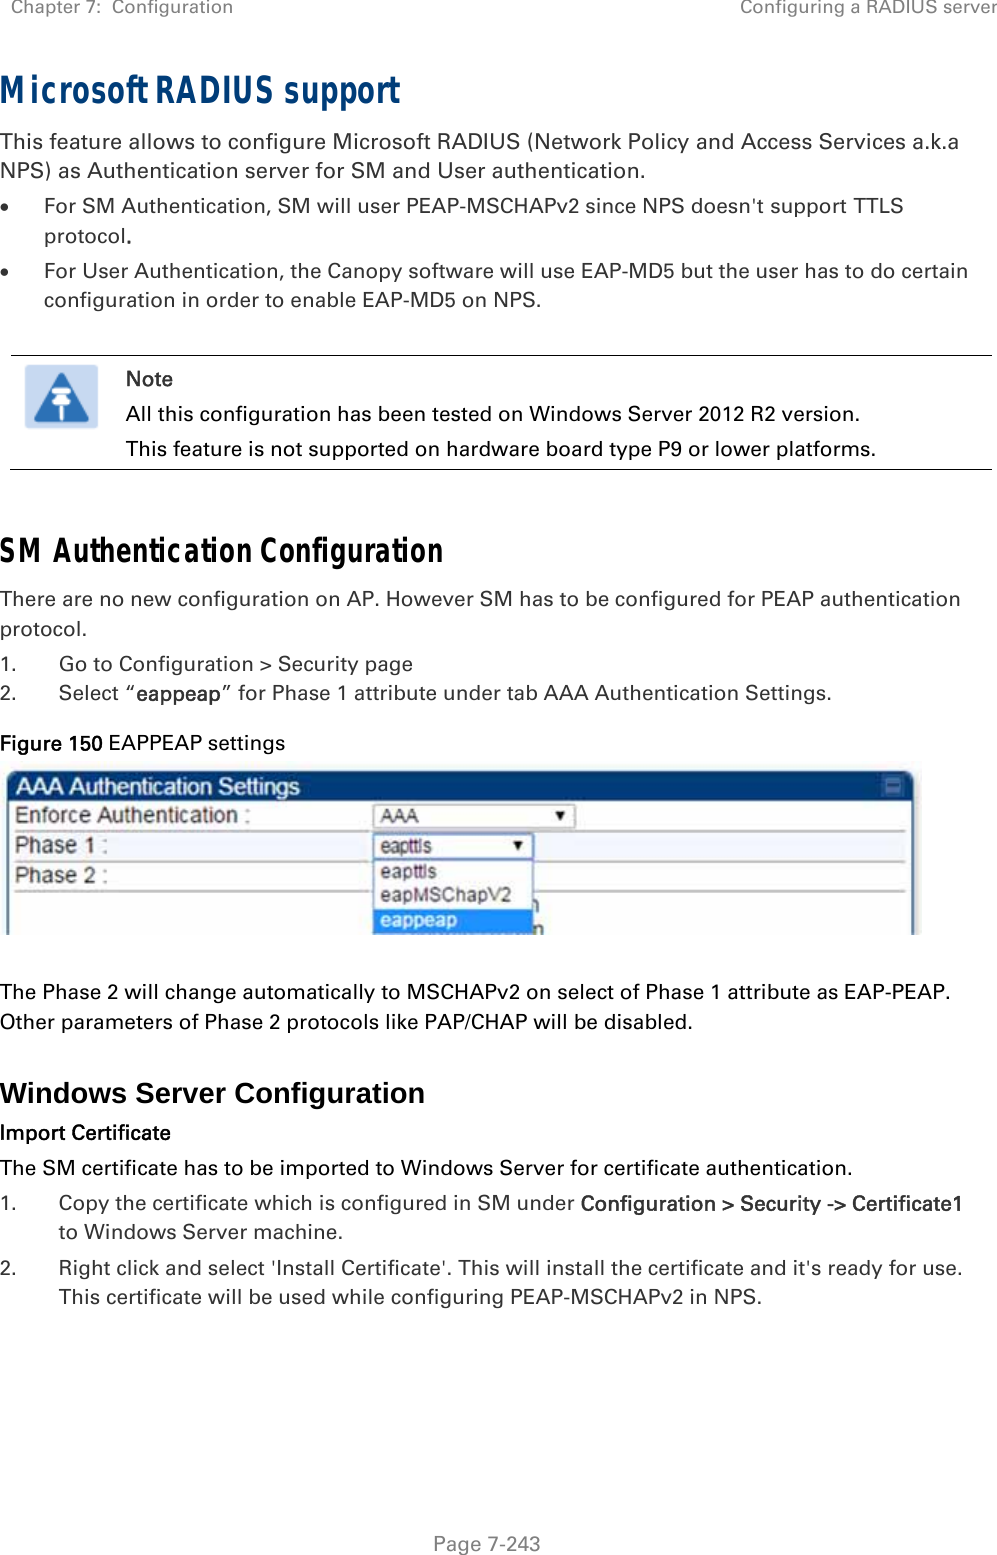 Chapter 7:  Configuration  Configuring a RADIUS server   Page 7-243 Microsoft RADIUS support This feature allows to configure Microsoft RADIUS (Network Policy and Access Services a.k.a NPS) as Authentication server for SM and User authentication.  For SM Authentication, SM will user PEAP-MSCHAPv2 since NPS doesn&apos;t support TTLS protocol.  For User Authentication, the Canopy software will use EAP-MD5 but the user has to do certain configuration in order to enable EAP-MD5 on NPS.   Note All this configuration has been tested on Windows Server 2012 R2 version. This feature is not supported on hardware board type P9 or lower platforms.  SM Authentication Configuration There are no new configuration on AP. However SM has to be configured for PEAP authentication protocol. 1. Go to Configuration &gt; Security page 2. Select “eappeap” for Phase 1 attribute under tab AAA Authentication Settings.  Figure 150 EAPPEAP settings     The Phase 2 will change automatically to MSCHAPv2 on select of Phase 1 attribute as EAP-PEAP. Other parameters of Phase 2 protocols like PAP/CHAP will be disabled.  Windows Server Configuration Import Certificate The SM certificate has to be imported to Windows Server for certificate authentication. 1. Copy the certificate which is configured in SM under Configuration &gt; Security -&gt; Certificate1 to Windows Server machine. 2. Right click and select &apos;Install Certificate&apos;. This will install the certificate and it&apos;s ready for use. This certificate will be used while configuring PEAP-MSCHAPv2 in NPS.   